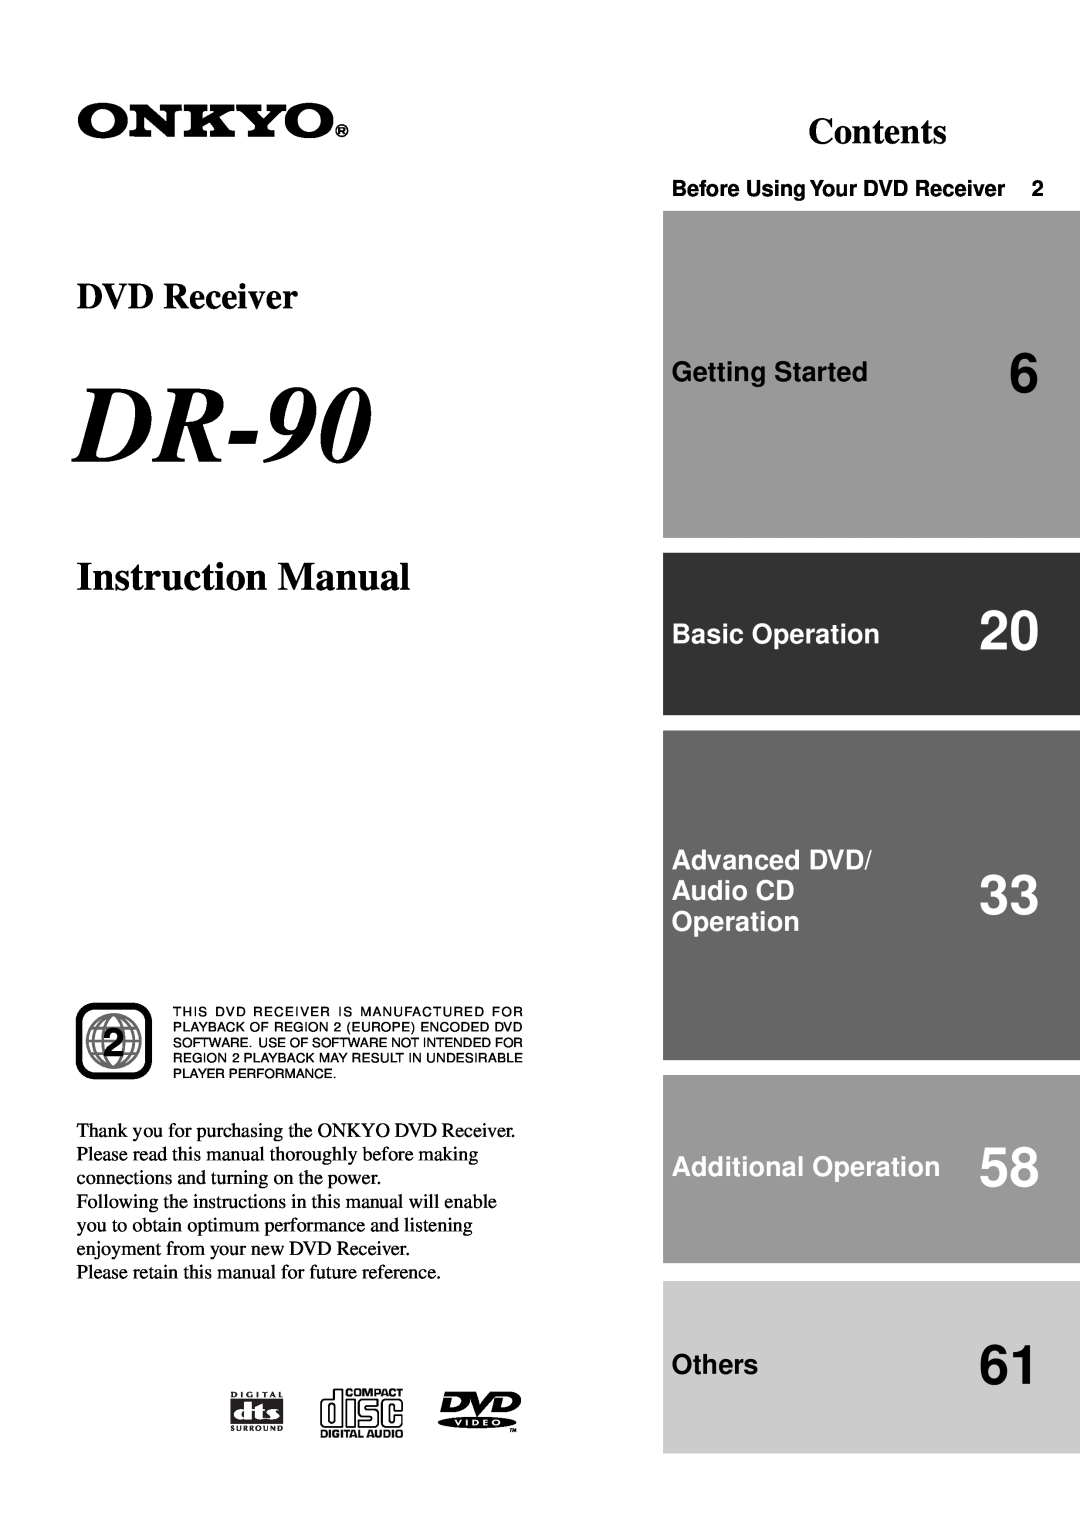 Onkyo DR-90 instruction manual Contents, Getting Started, Others61, Before Using Your DVD Receiver, Basic Operation 